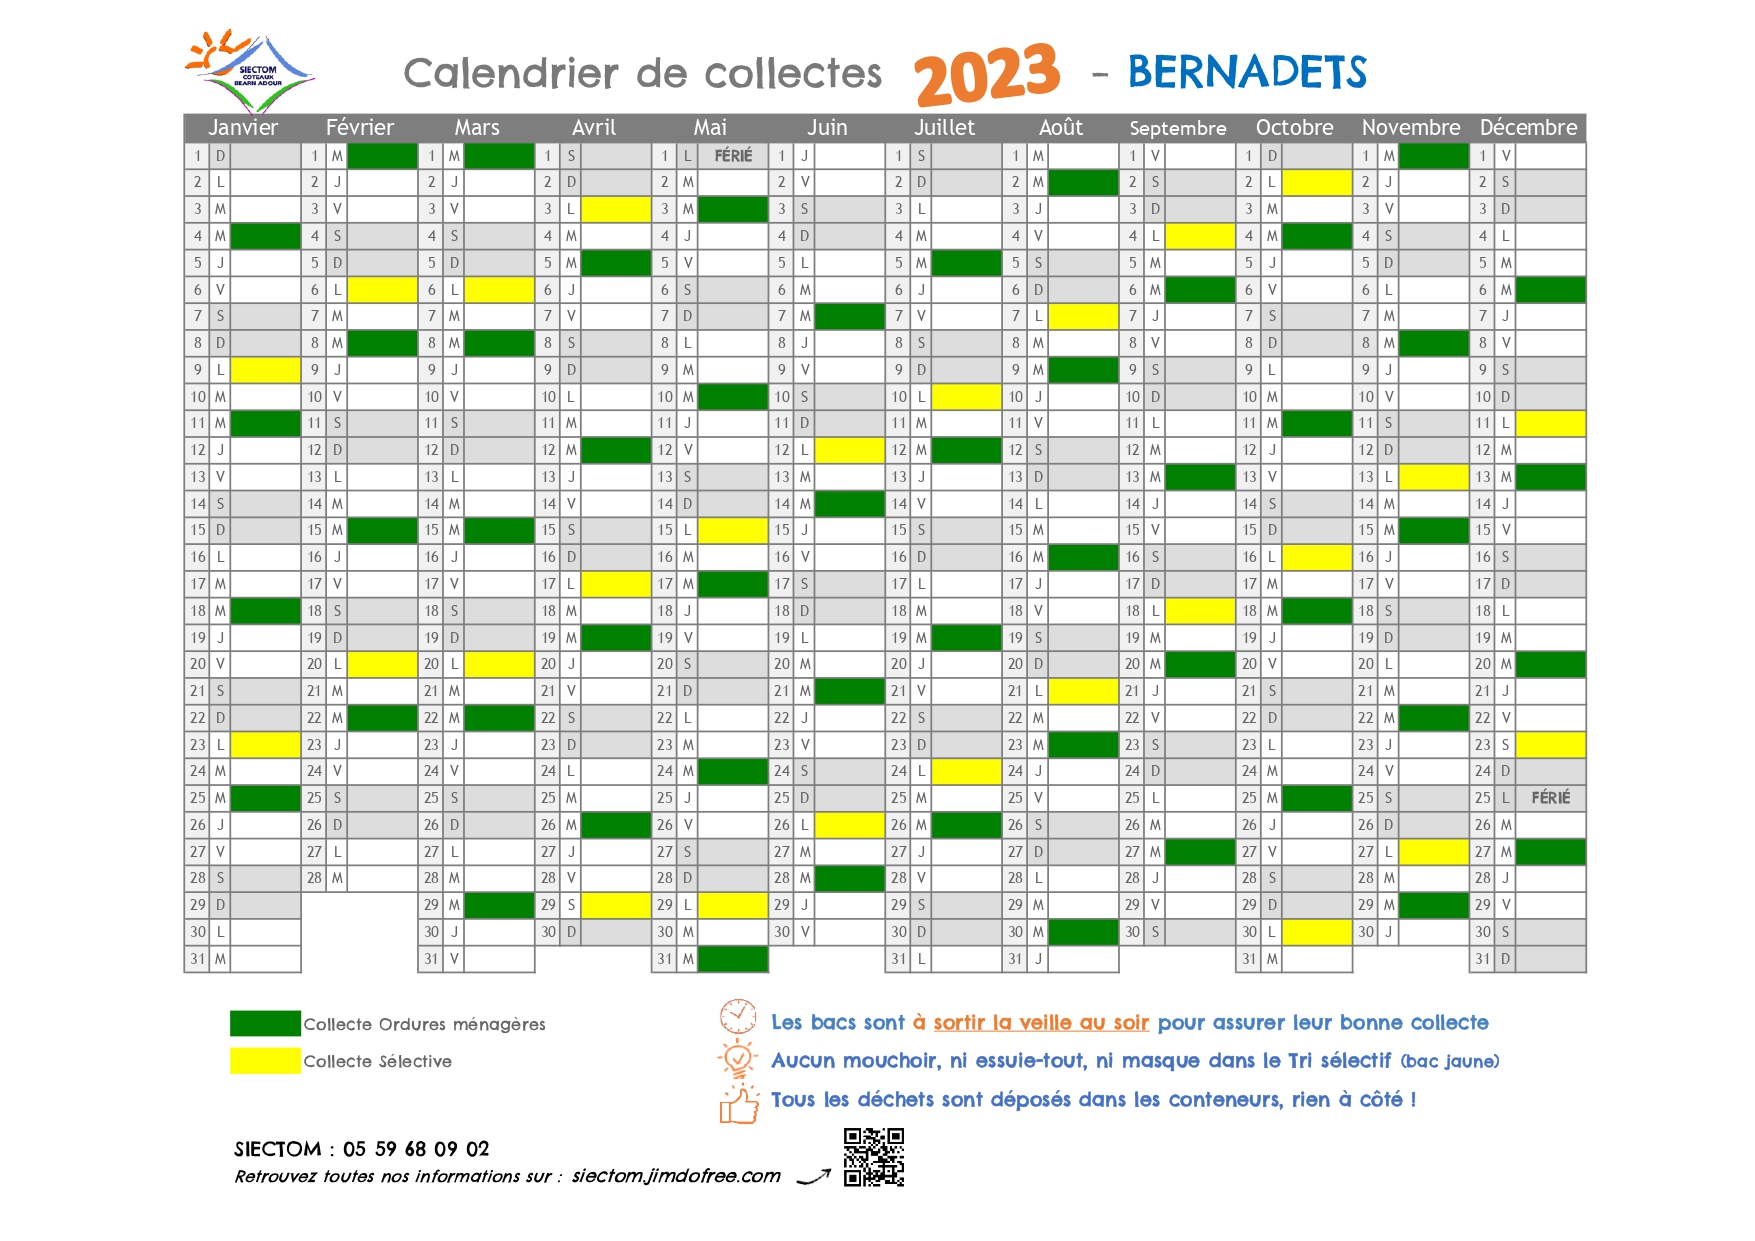 BERNADETS calendrier collectes 2023 page 0001